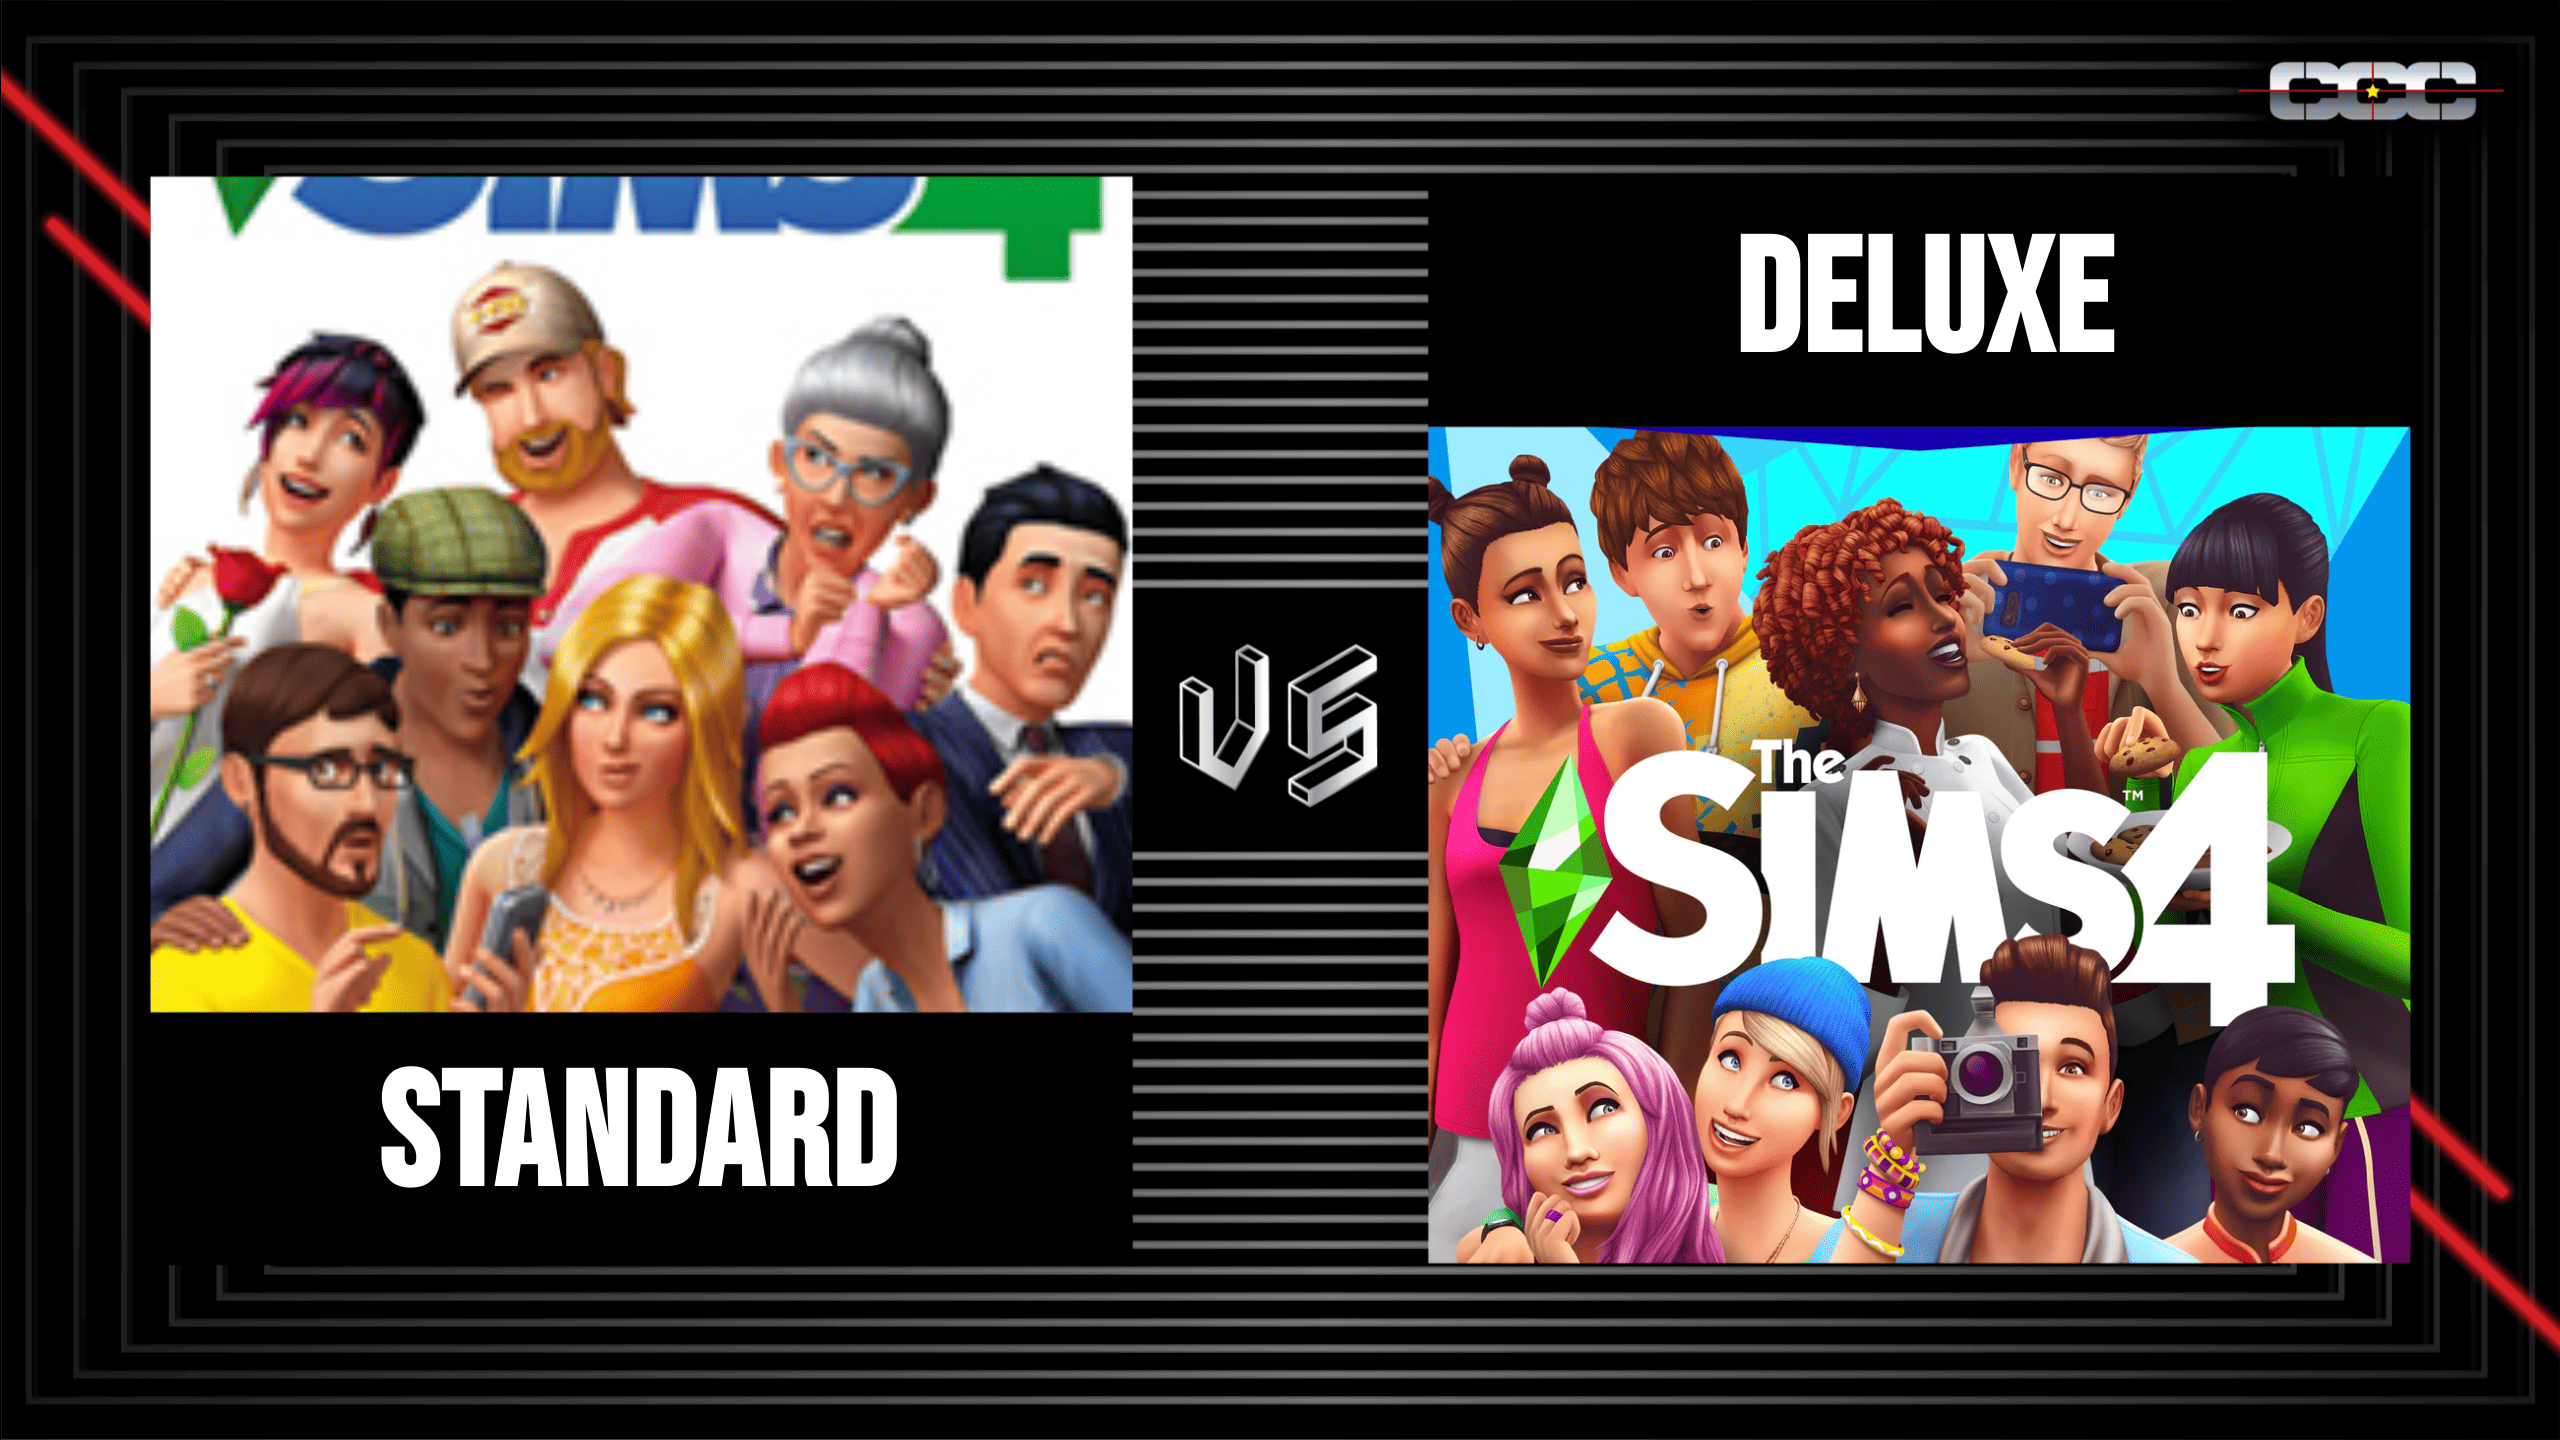 Minecraft Legends: Differences Between Standard and Deluxe Edition